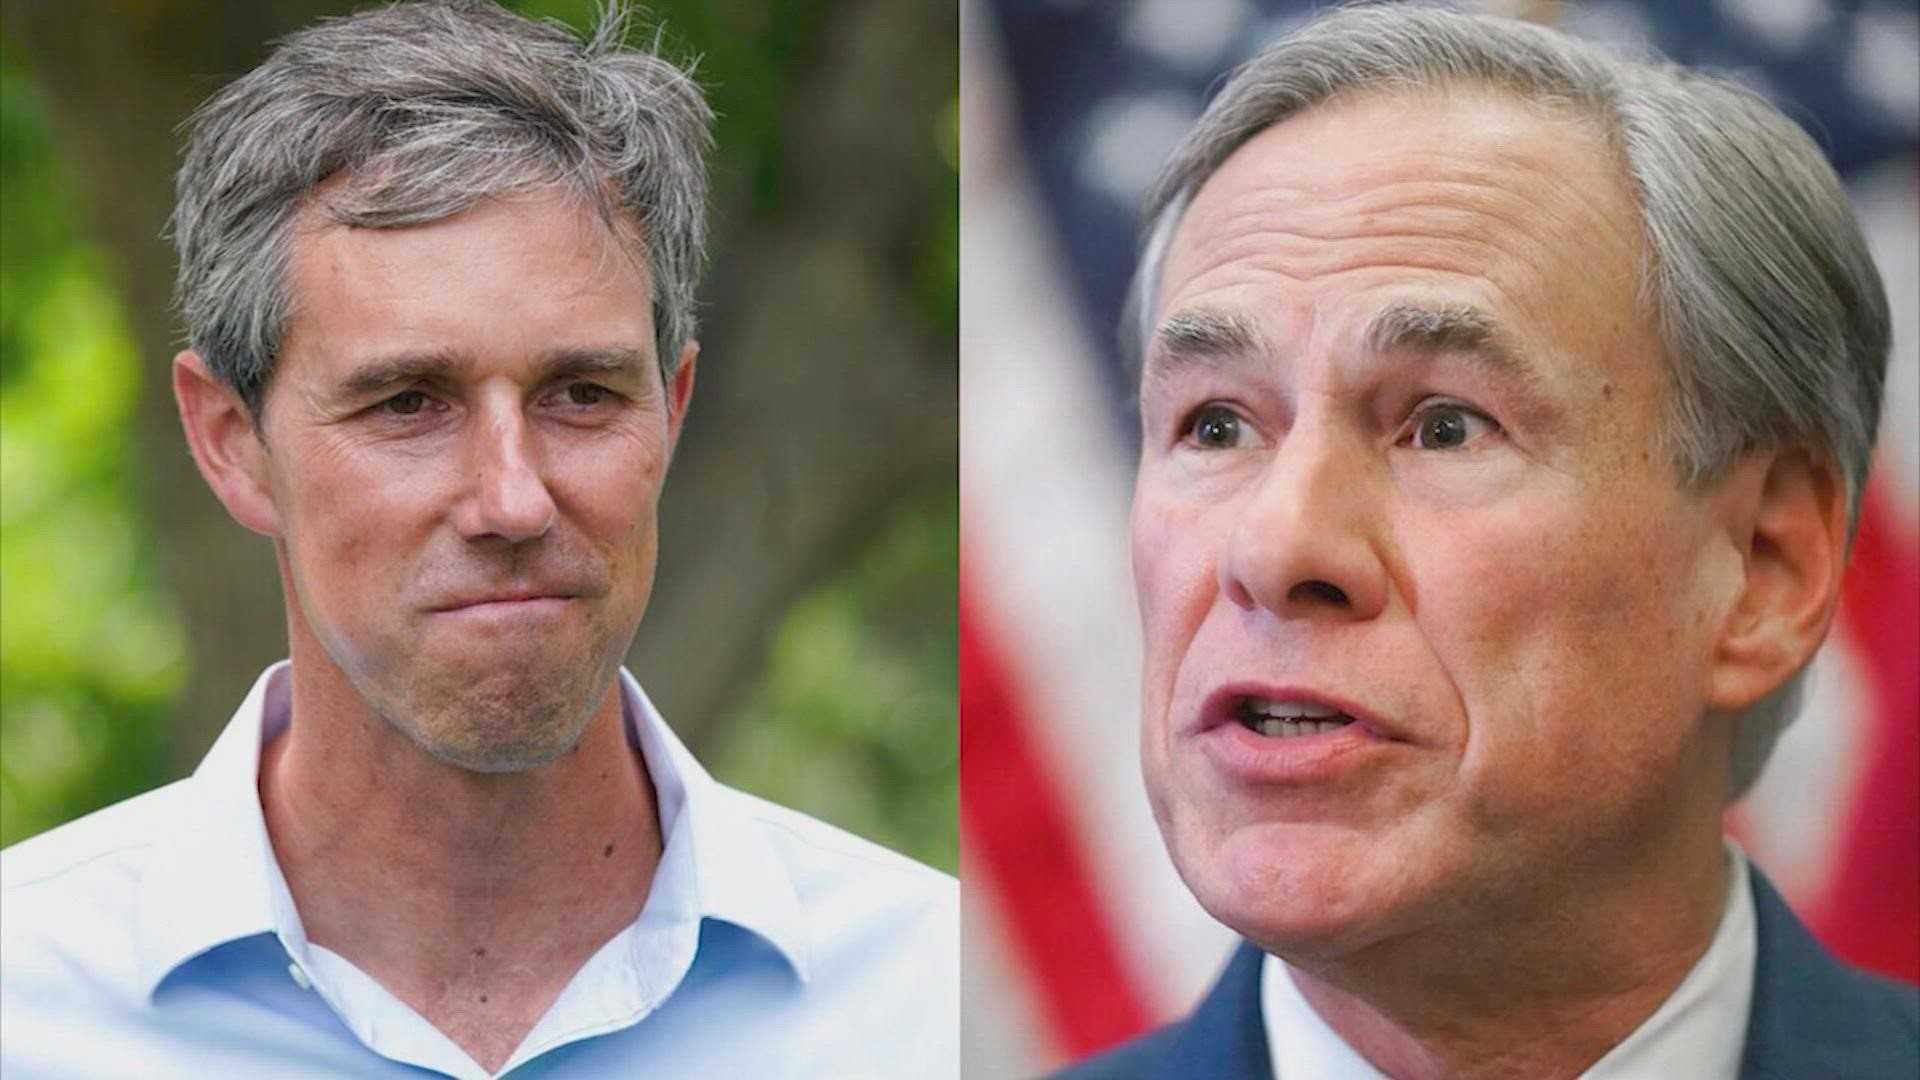 Republican Gov. Greg Abbott is pushing back and going after his Democratic opponent, Beto O'Rourke, on abortion issues.